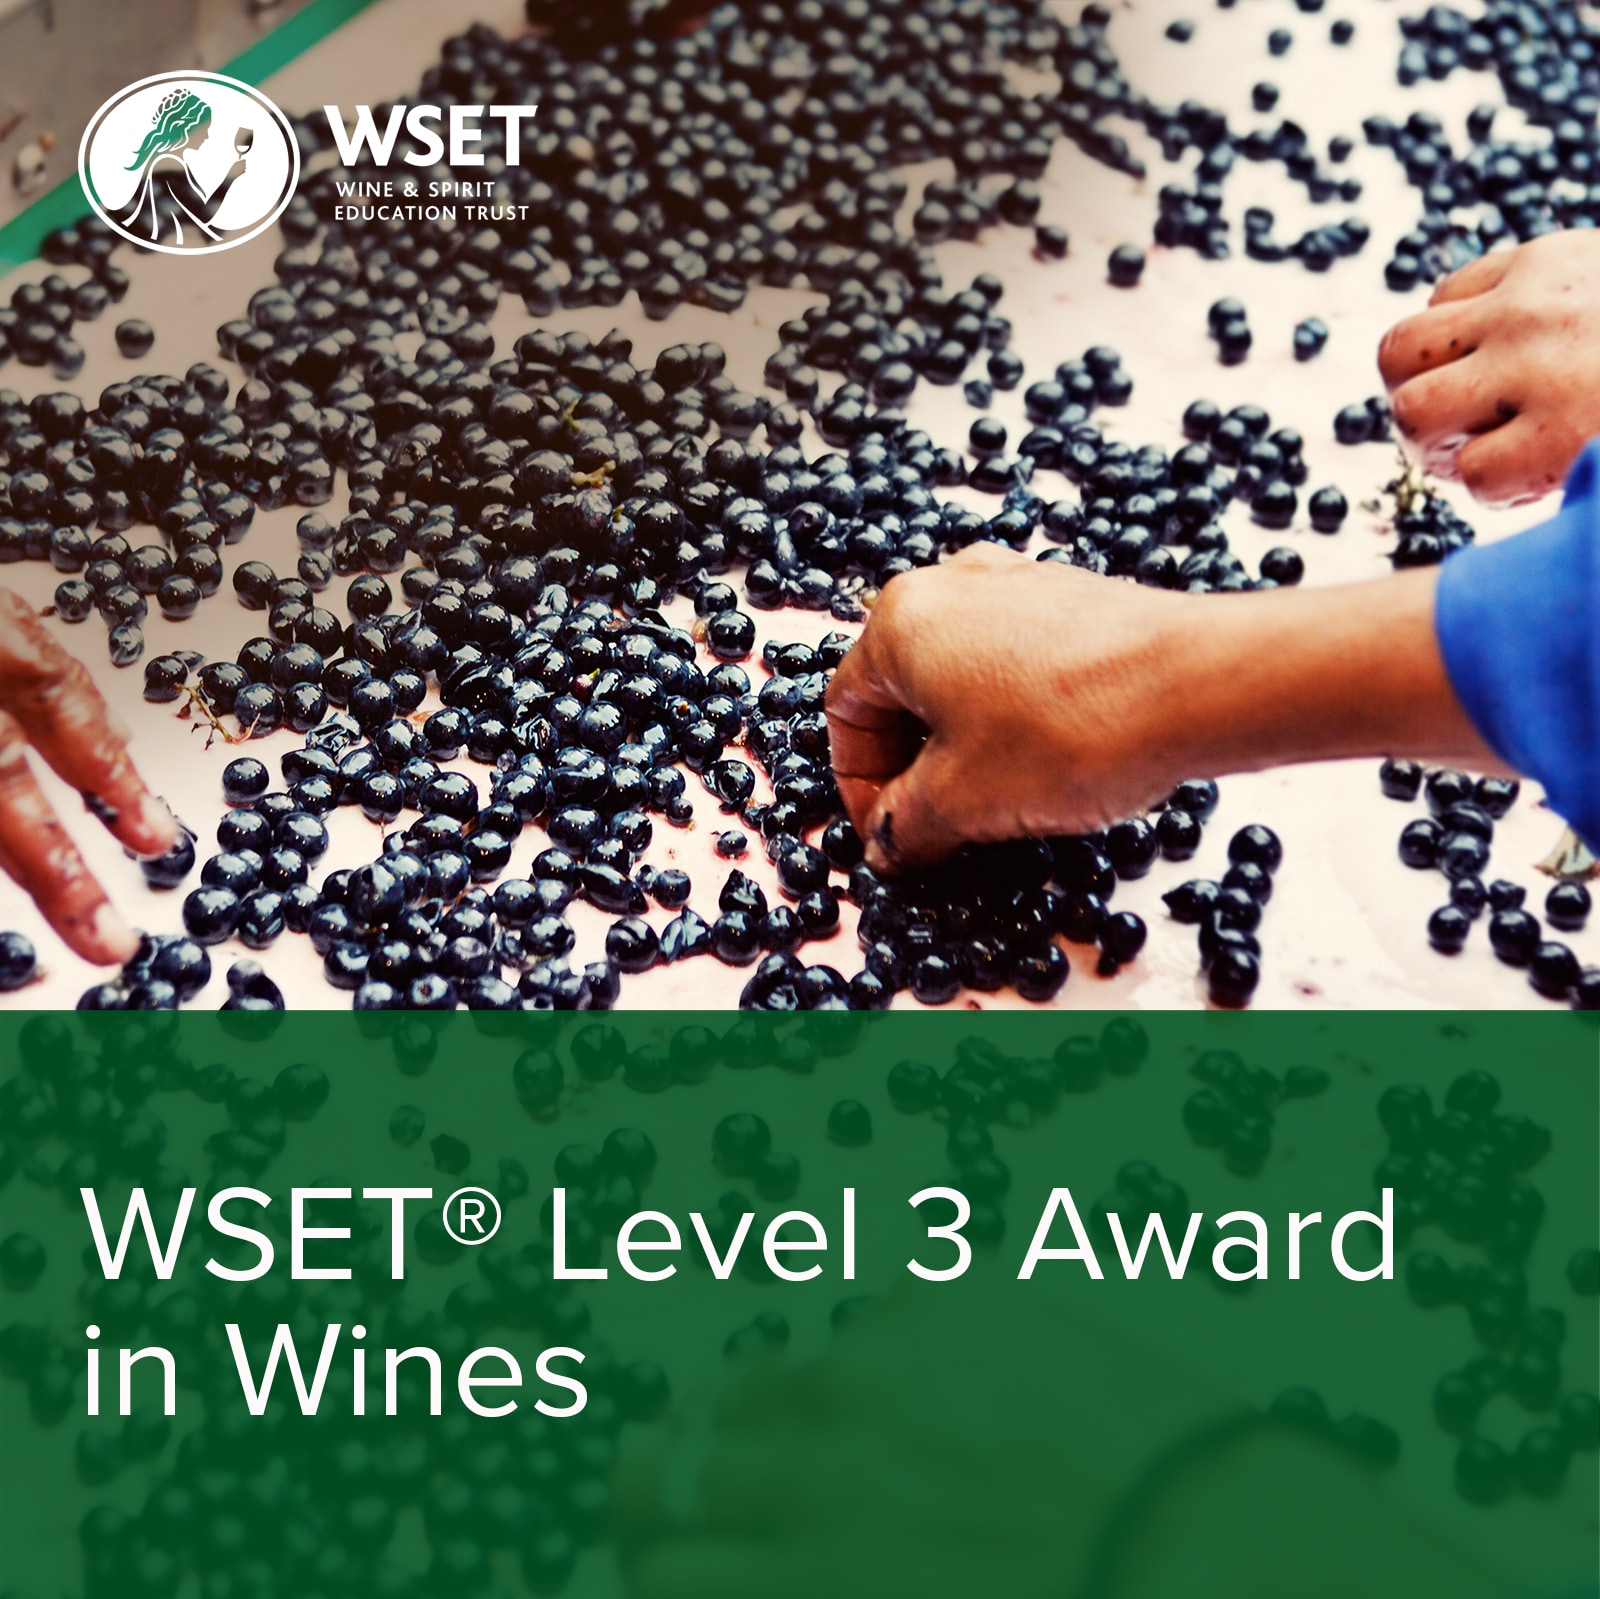 WSET Level 3 in Wines at Averys, Mon 4th Sept 2023 